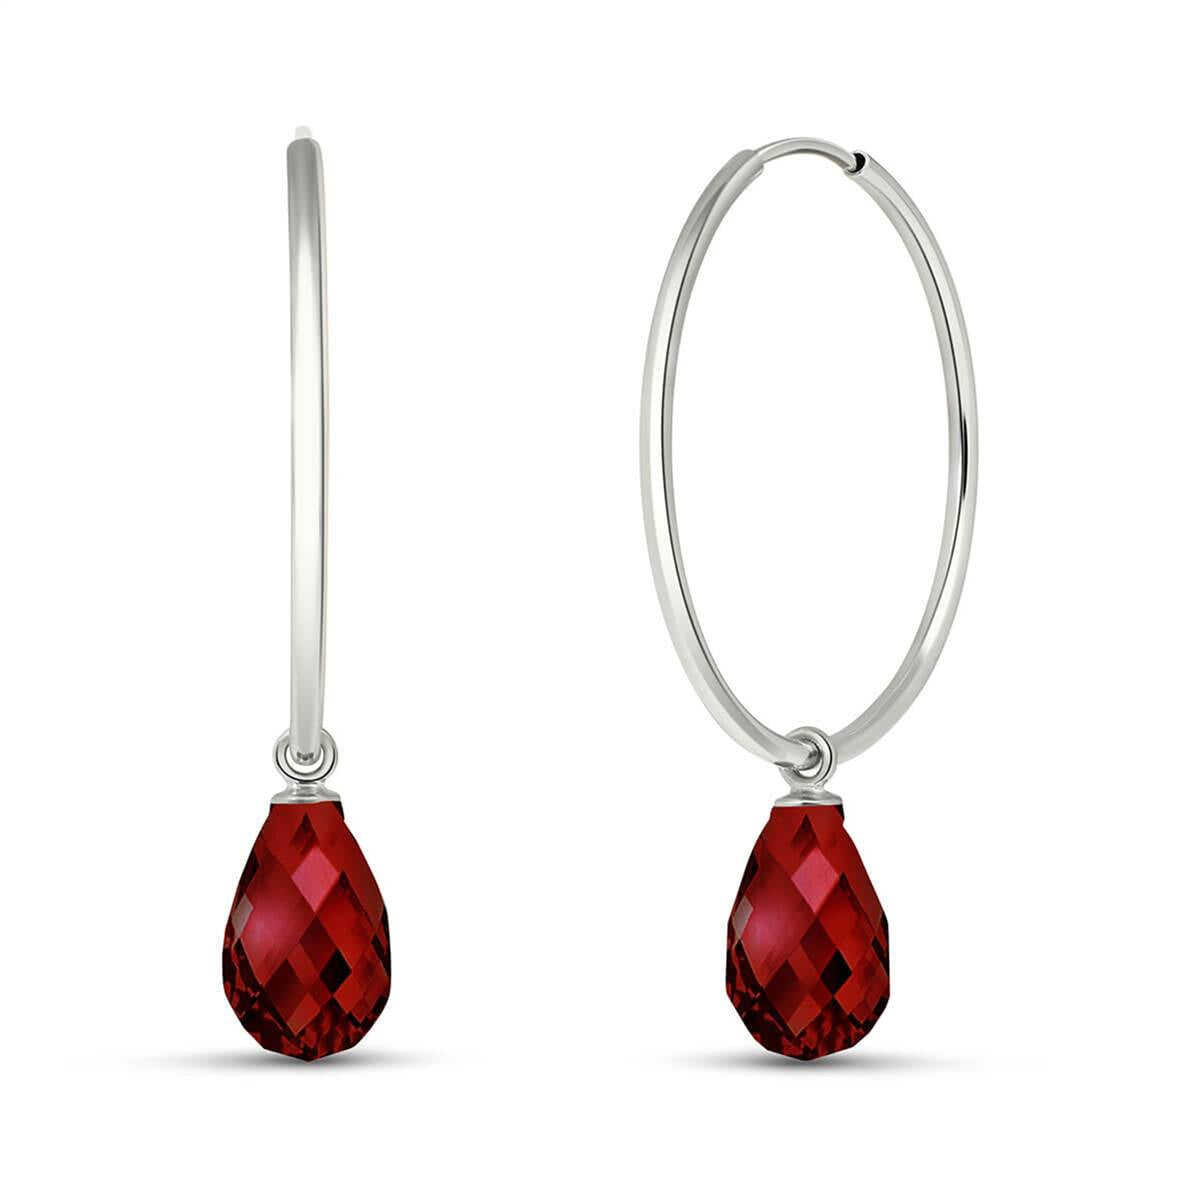 4.5 Carat 14K Solid White Gold What We Wish For Garnet Earrings